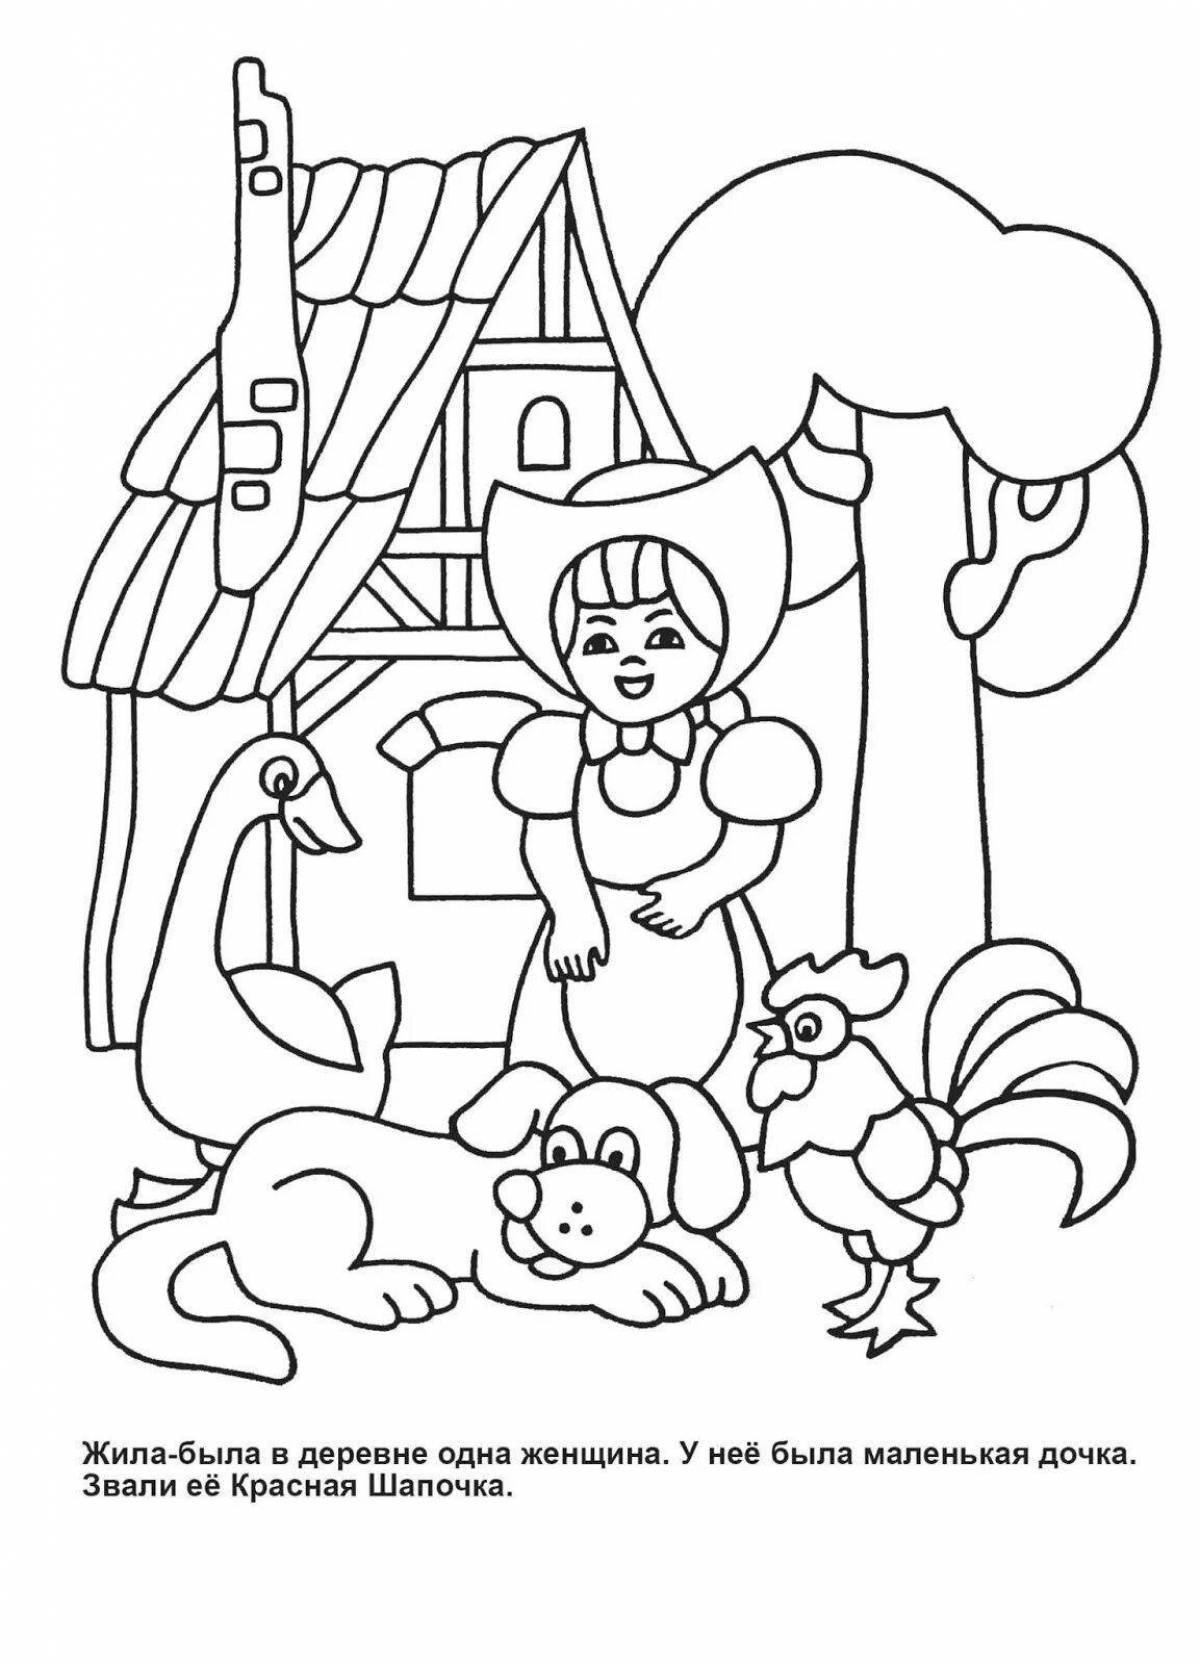 Luxury coloring book from perrault's tales